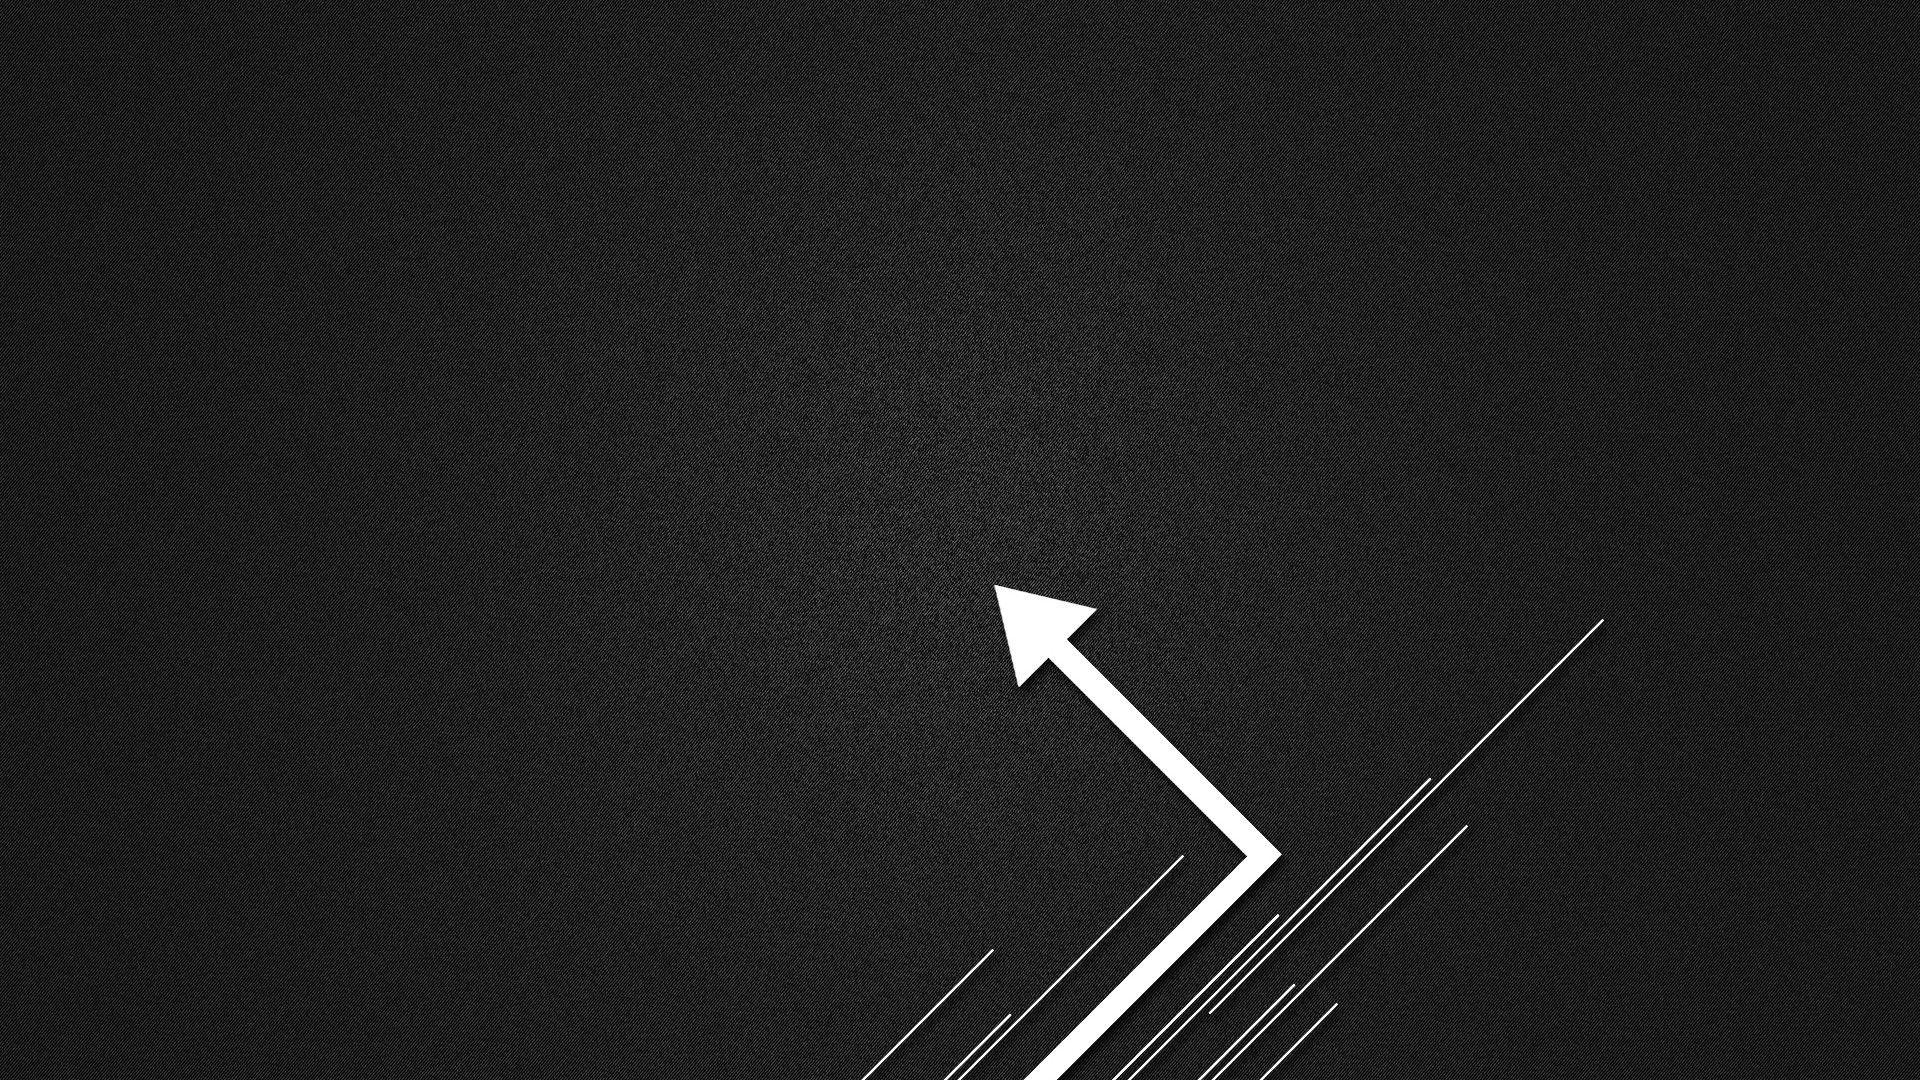 Wallpaper For > Black And Grey Abstract Background